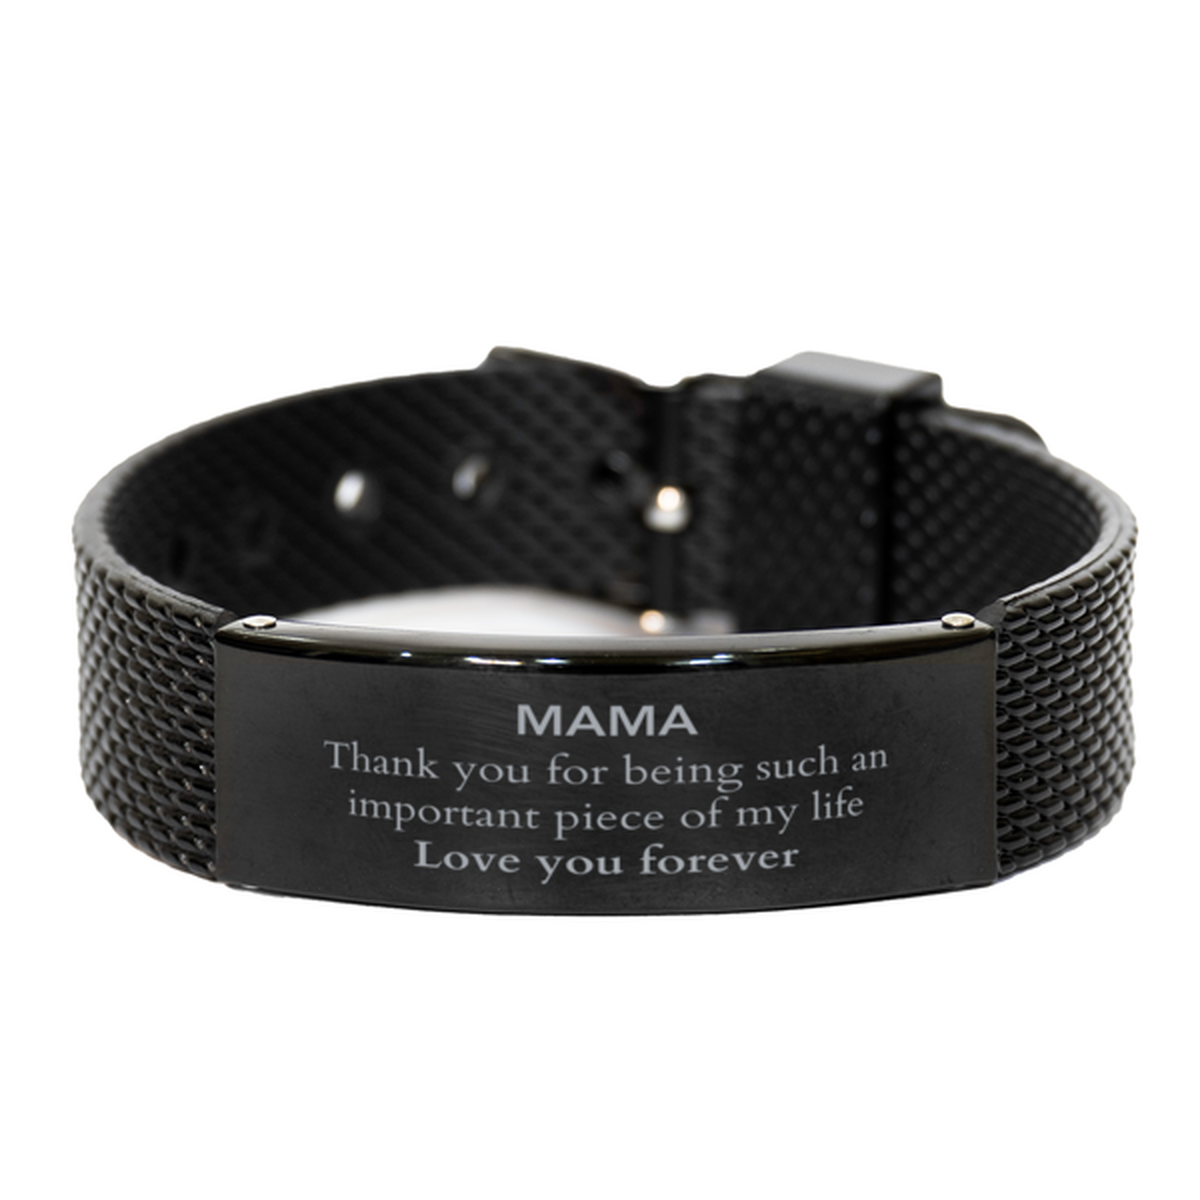 Appropriate Mama Black Shark Mesh Bracelet Epic Birthday Gifts for Mama Thank you for being such an important piece of my life Mama Christmas Mothers Fathers Day